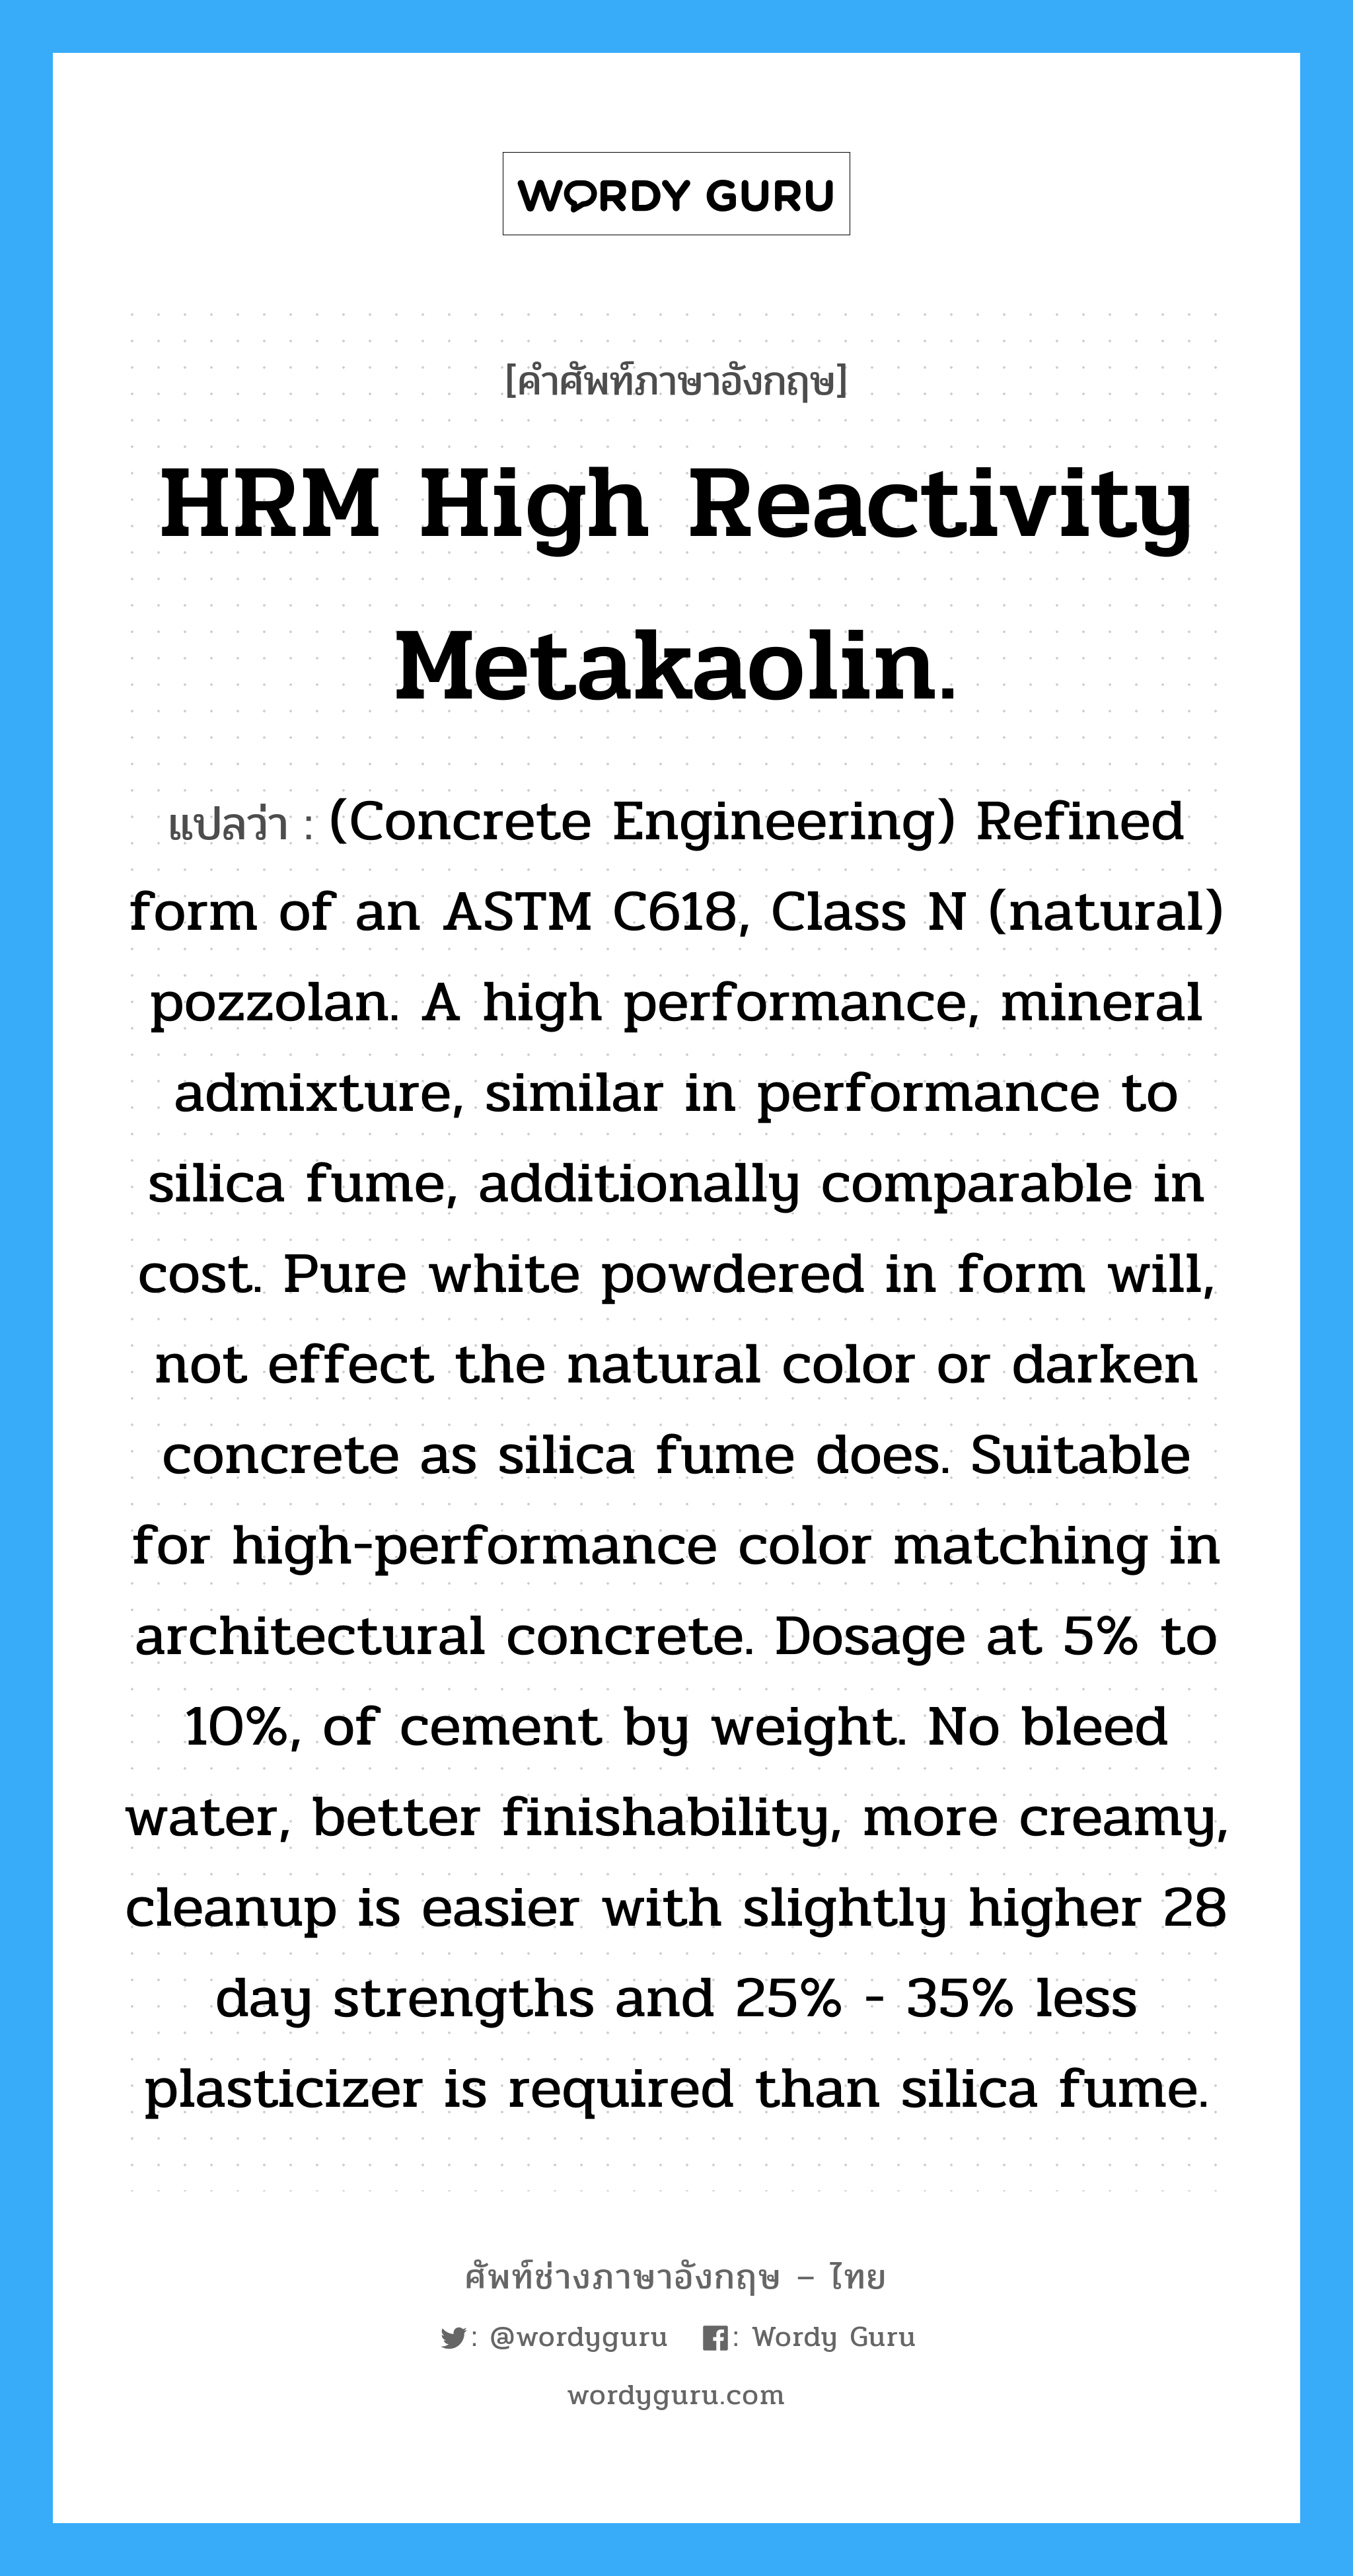 (Concrete Engineering) Refined form of an ASTM C618, Class N (natural) pozzolan. A high performance, mineral admixture, similar in performance to silica fume, additionally comparable in cost. Pure white powdered in form will, not effect the natural color or darken concrete as silica fume does. Suitable for high-performance color matching in architectural concrete. Dosage at 5% to 10%, of cement by weight. No bleed water, better finishability, more creamy, cleanup is easier with slightly higher 28 day strengths and 25% - 35% less plasticizer is required than silica fume. ภาษาอังกฤษ?, คำศัพท์ช่างภาษาอังกฤษ - ไทย (Concrete Engineering) Refined form of an ASTM C618, Class N (natural) pozzolan. A high performance, mineral admixture, similar in performance to silica fume, additionally comparable in cost. Pure white powdered in form will, not effect the natural color or darken concrete as silica fume does. Suitable for high-performance color matching in architectural concrete. Dosage at 5% to 10%, of cement by weight. No bleed water, better finishability, more creamy, cleanup is easier with slightly higher 28 day strengths and 25% - 35% less plasticizer is required than silica fume. คำศัพท์ภาษาอังกฤษ (Concrete Engineering) Refined form of an ASTM C618, Class N (natural) pozzolan. A high performance, mineral admixture, similar in performance to silica fume, additionally comparable in cost. Pure white powdered in form will, not effect the natural color or darken concrete as silica fume does. Suitable for high-performance color matching in architectural concrete. Dosage at 5% to 10%, of cement by weight. No bleed water, better finishability, more creamy, cleanup is easier with slightly higher 28 day strengths and 25% - 35% less plasticizer is required than silica fume. แปลว่า HRM High Reactivity Metakaolin.